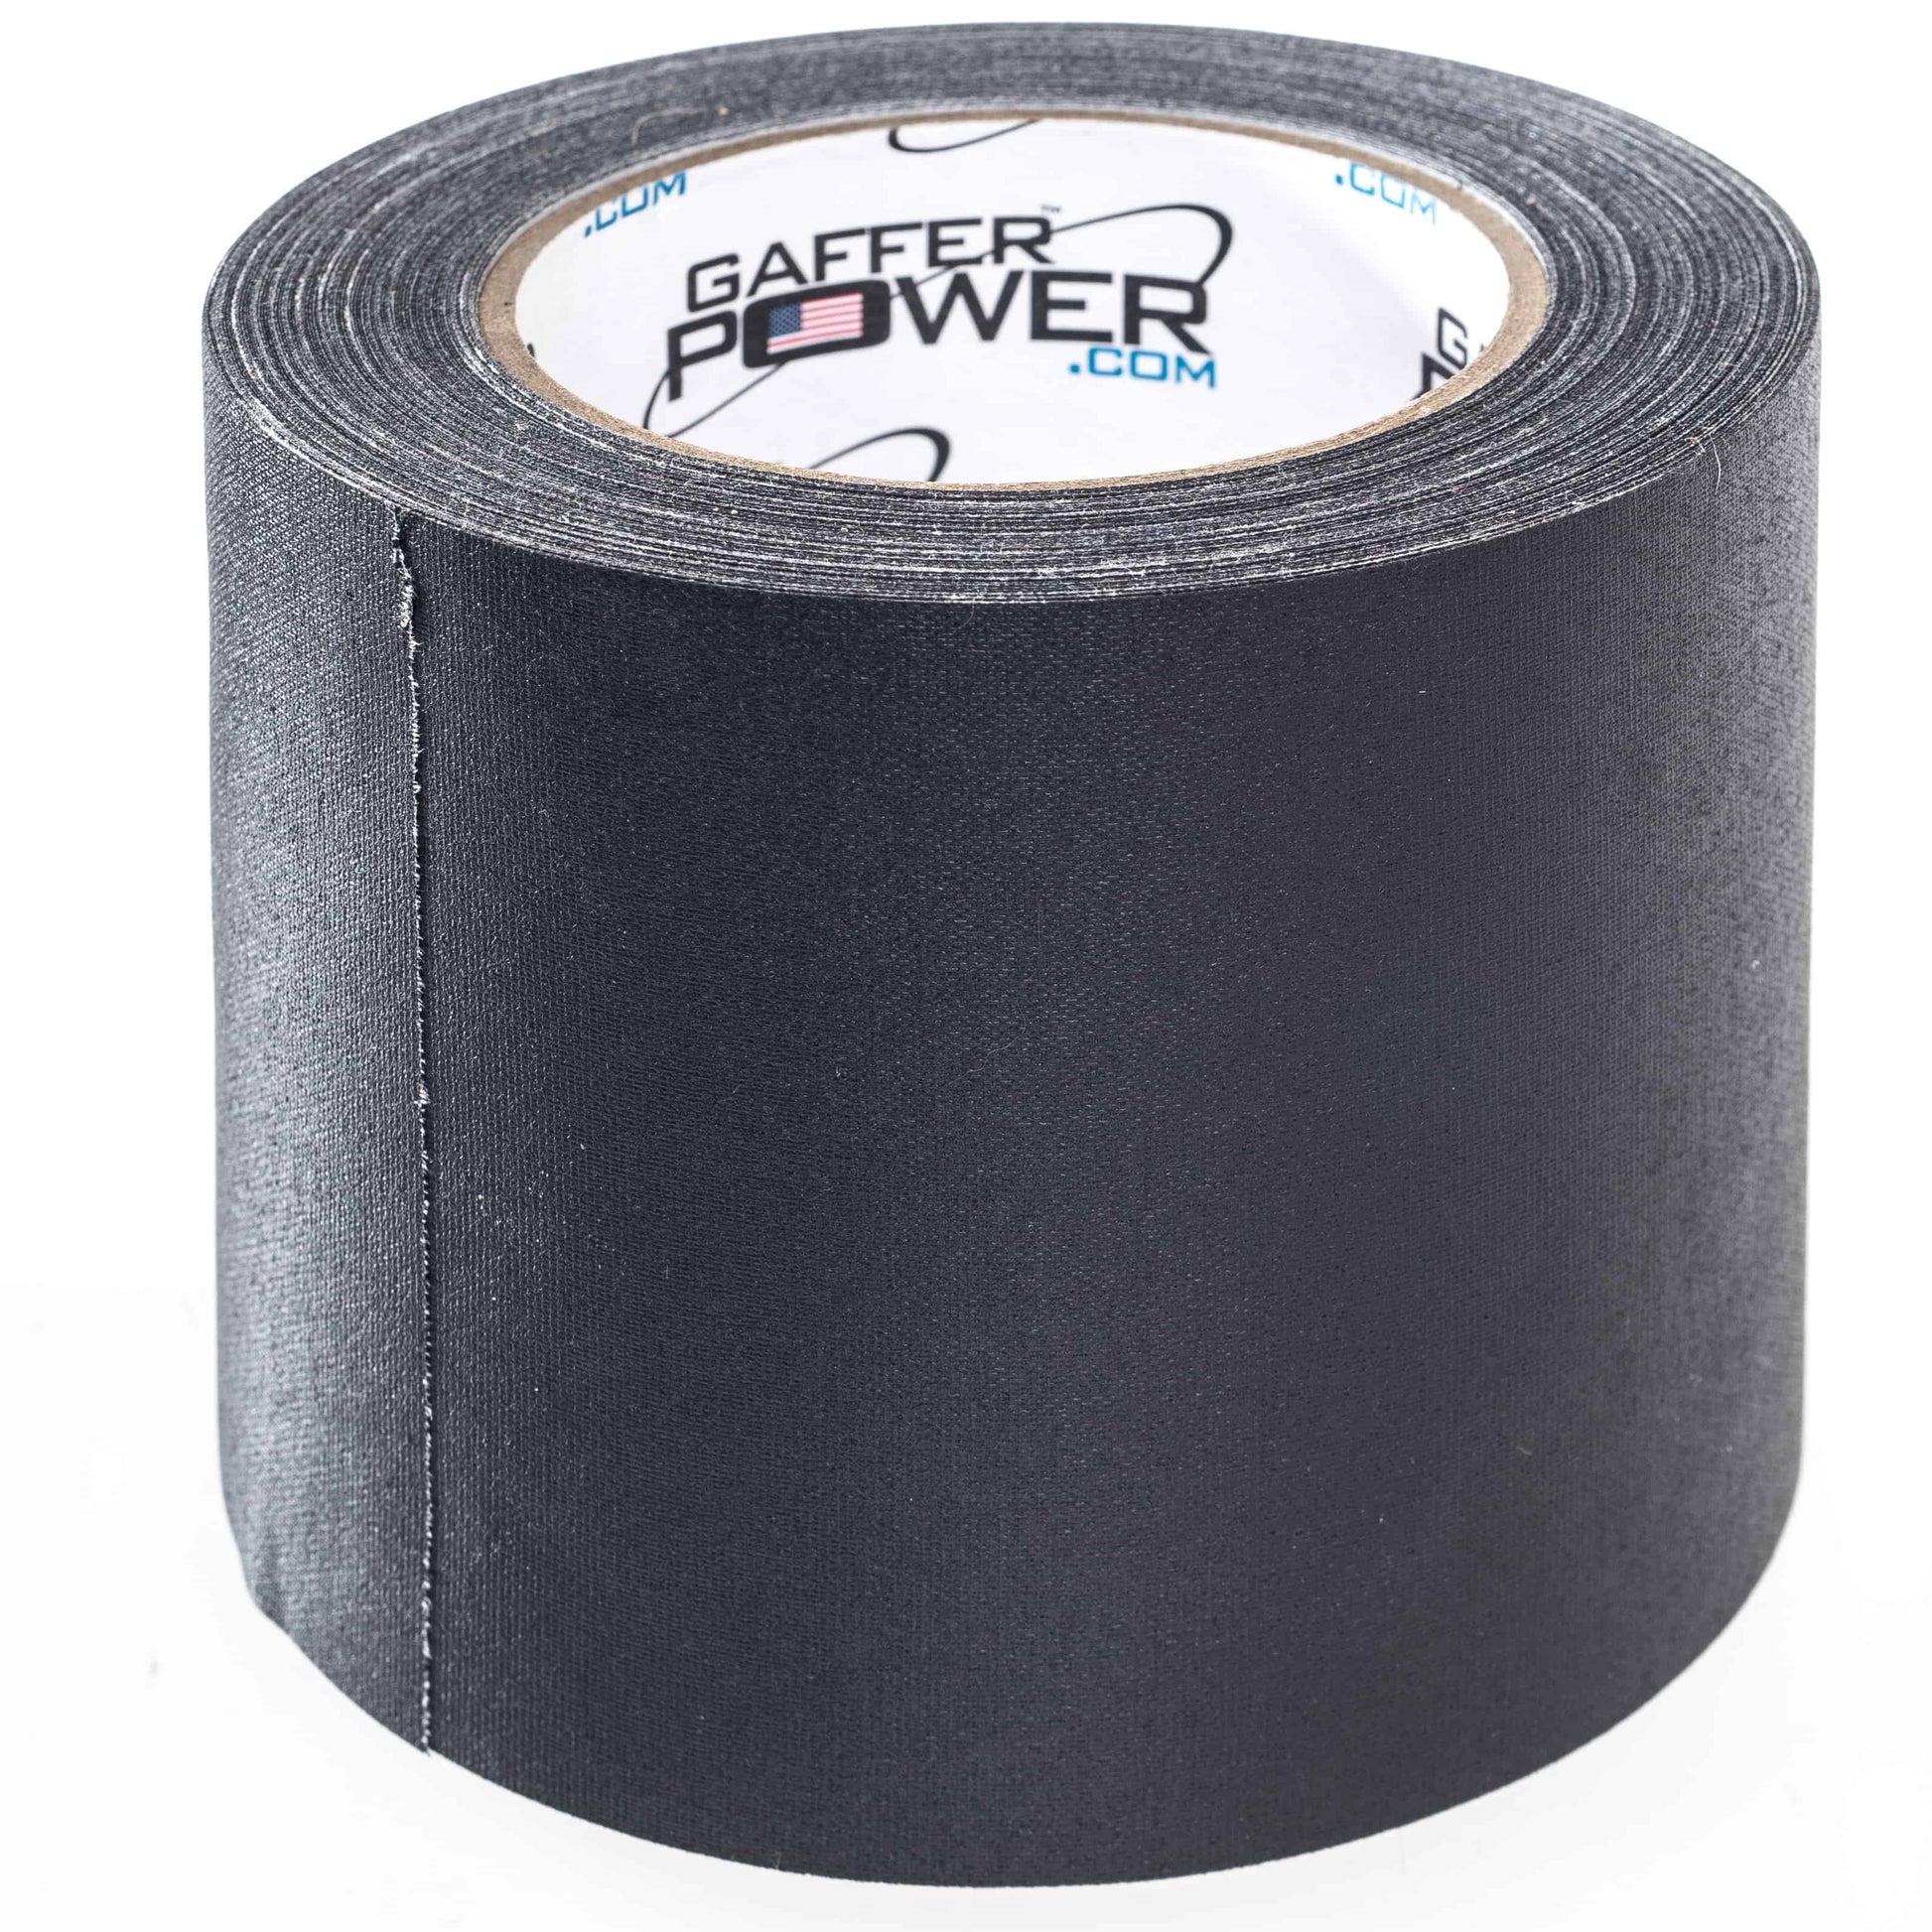 Pro Drafting Low Tack Paper Tape 1 inch x 60 Yards